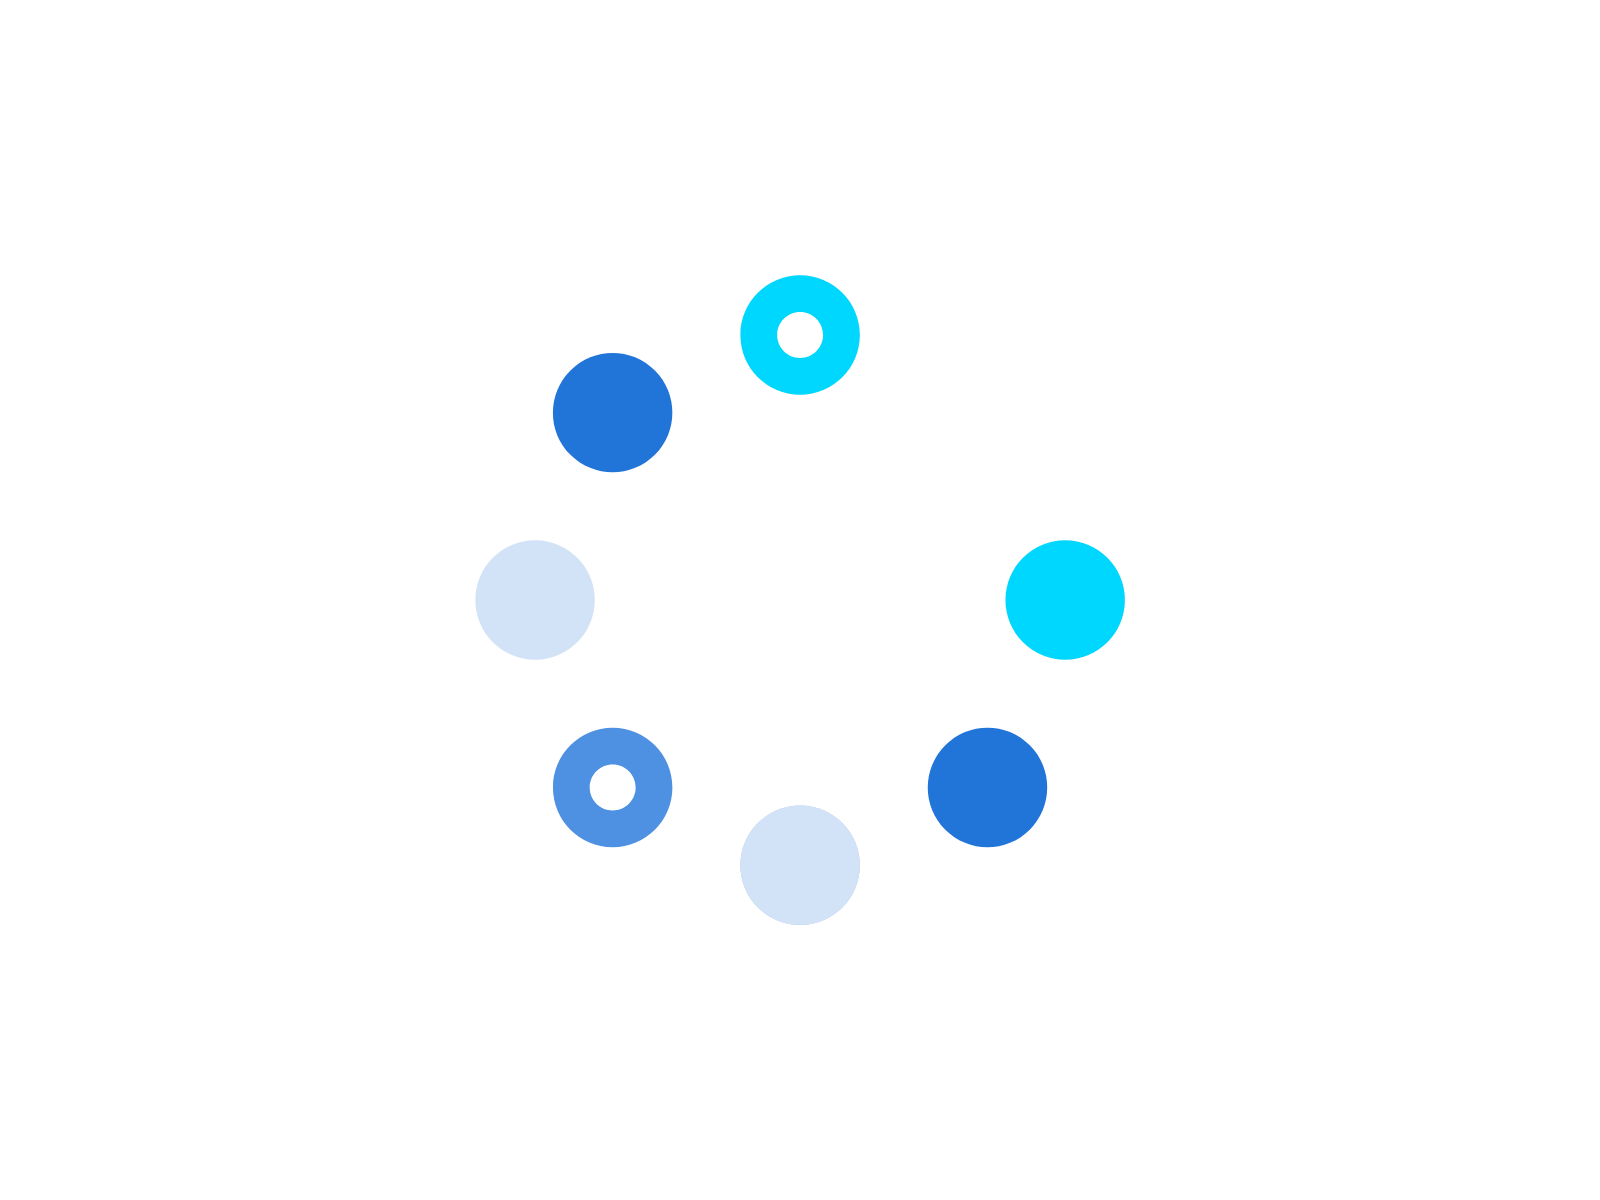 an illustration of different circles forming one large circle